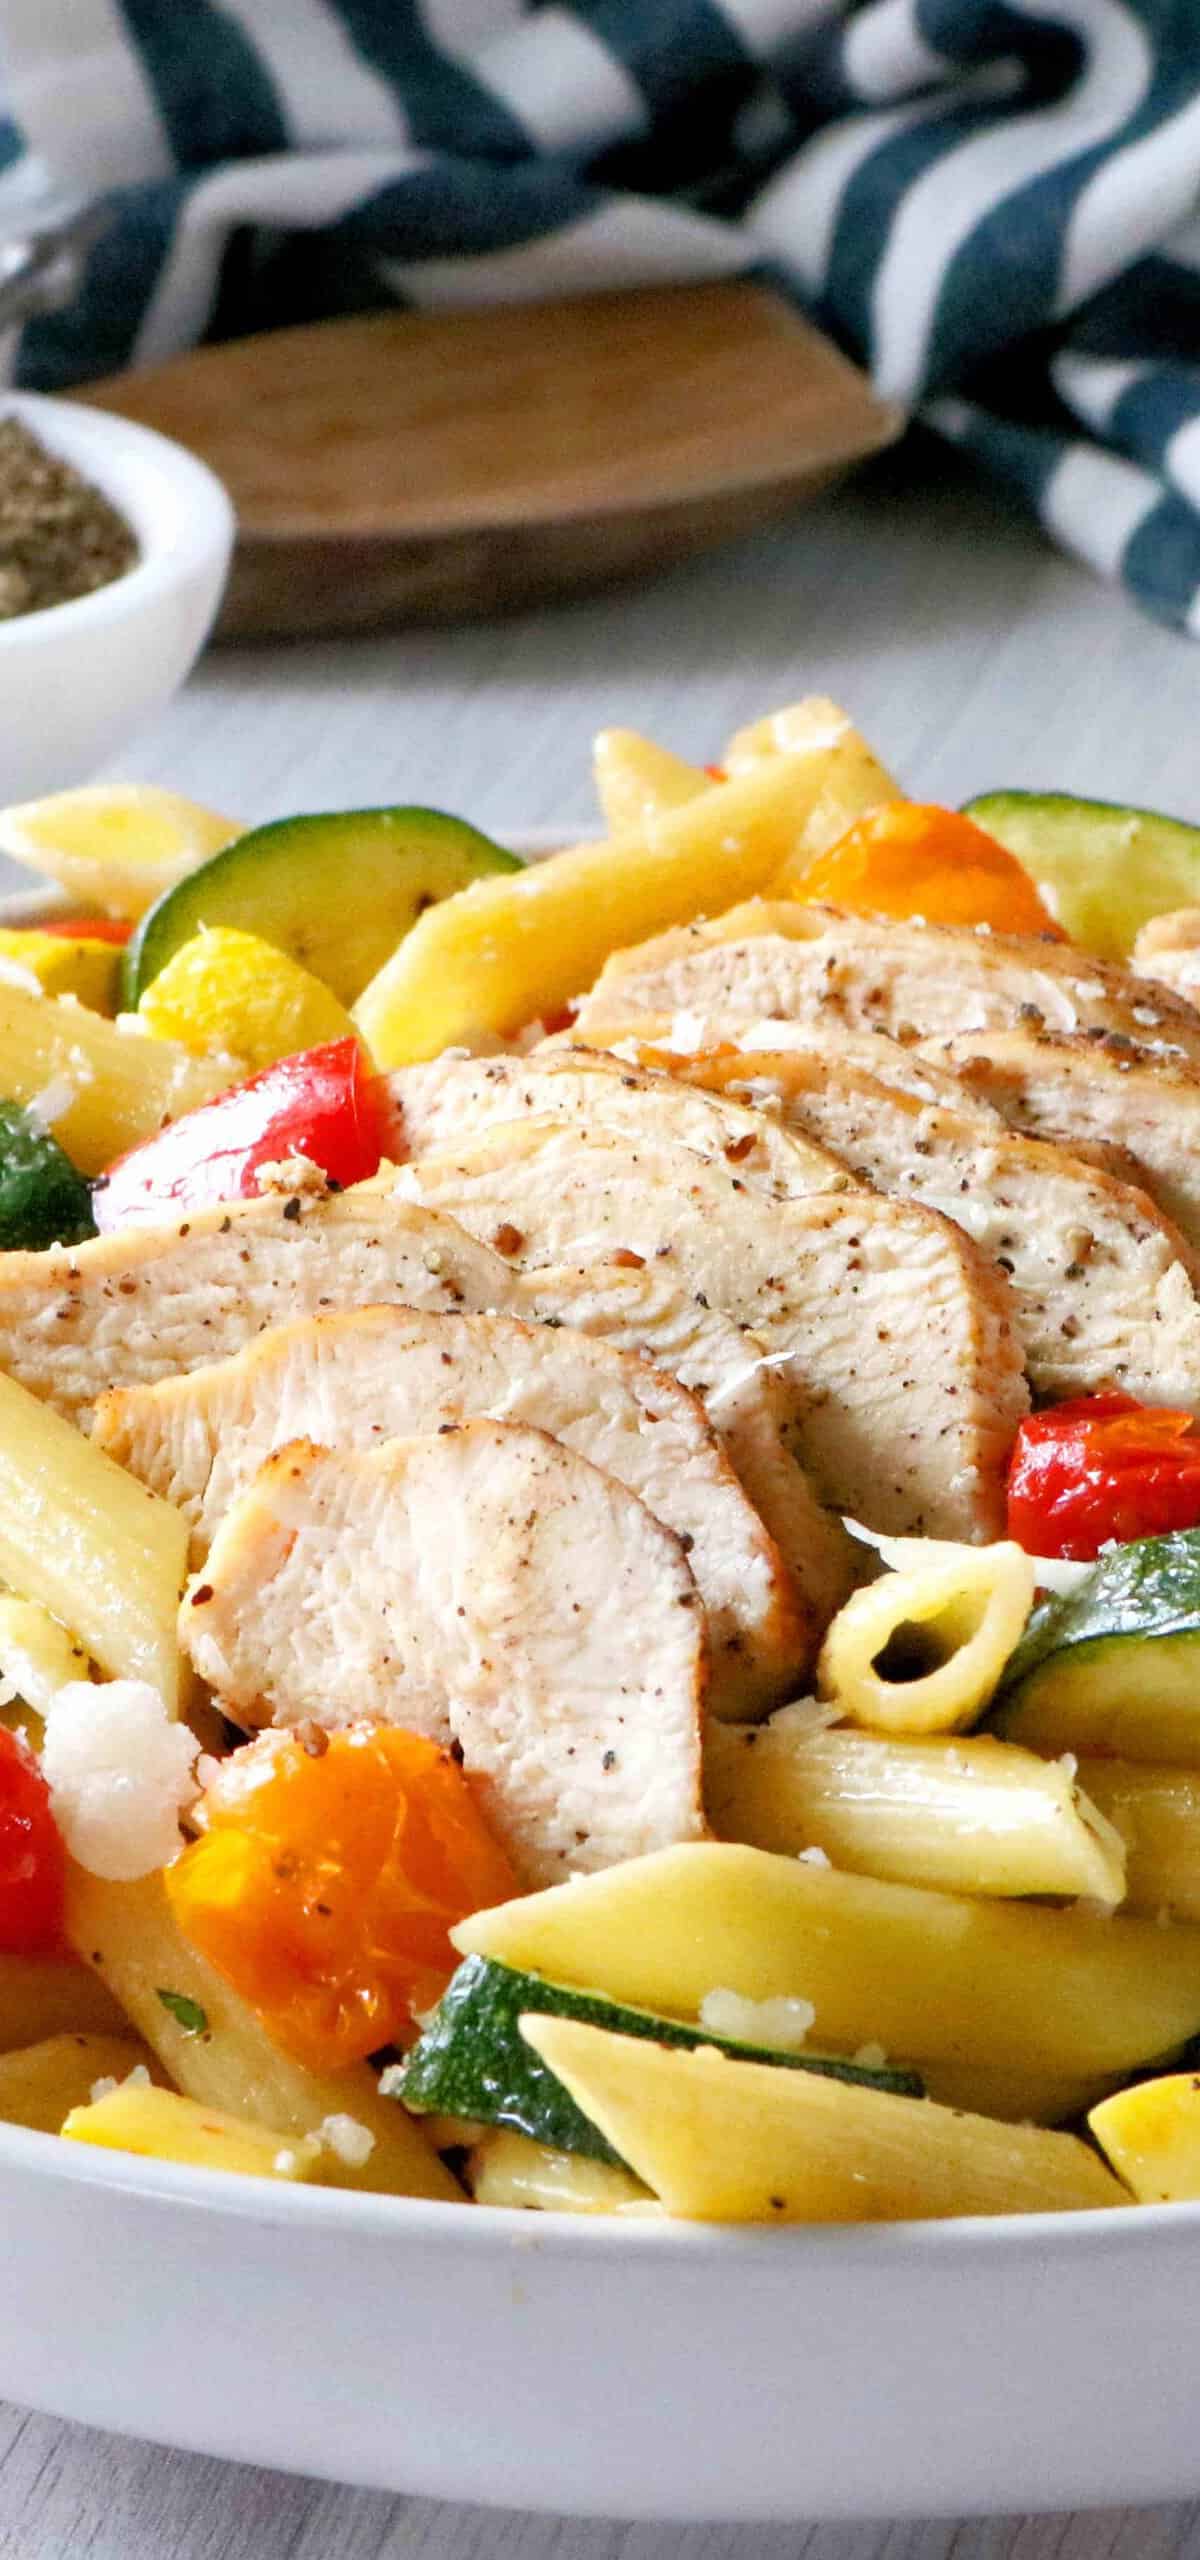  You won't believe how fast this pasta primavera comes together until you try it yourself.